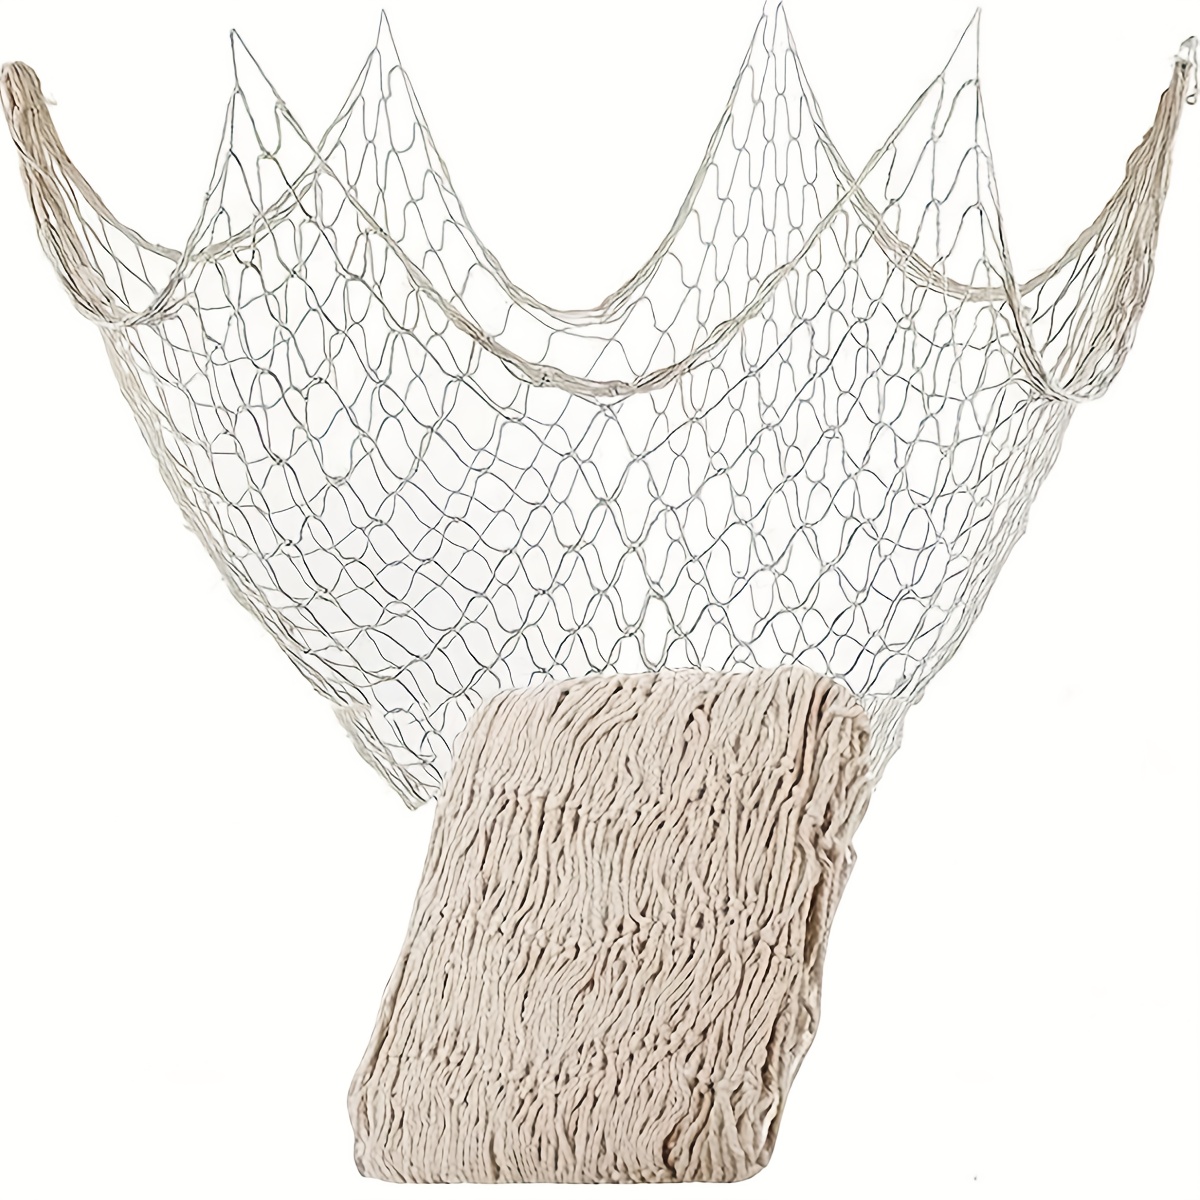 Fishing Net Decoration Fish Netting with Seashell Decor Nautical Party Decorations Home Garden Decor Net, Size: 100, Beige